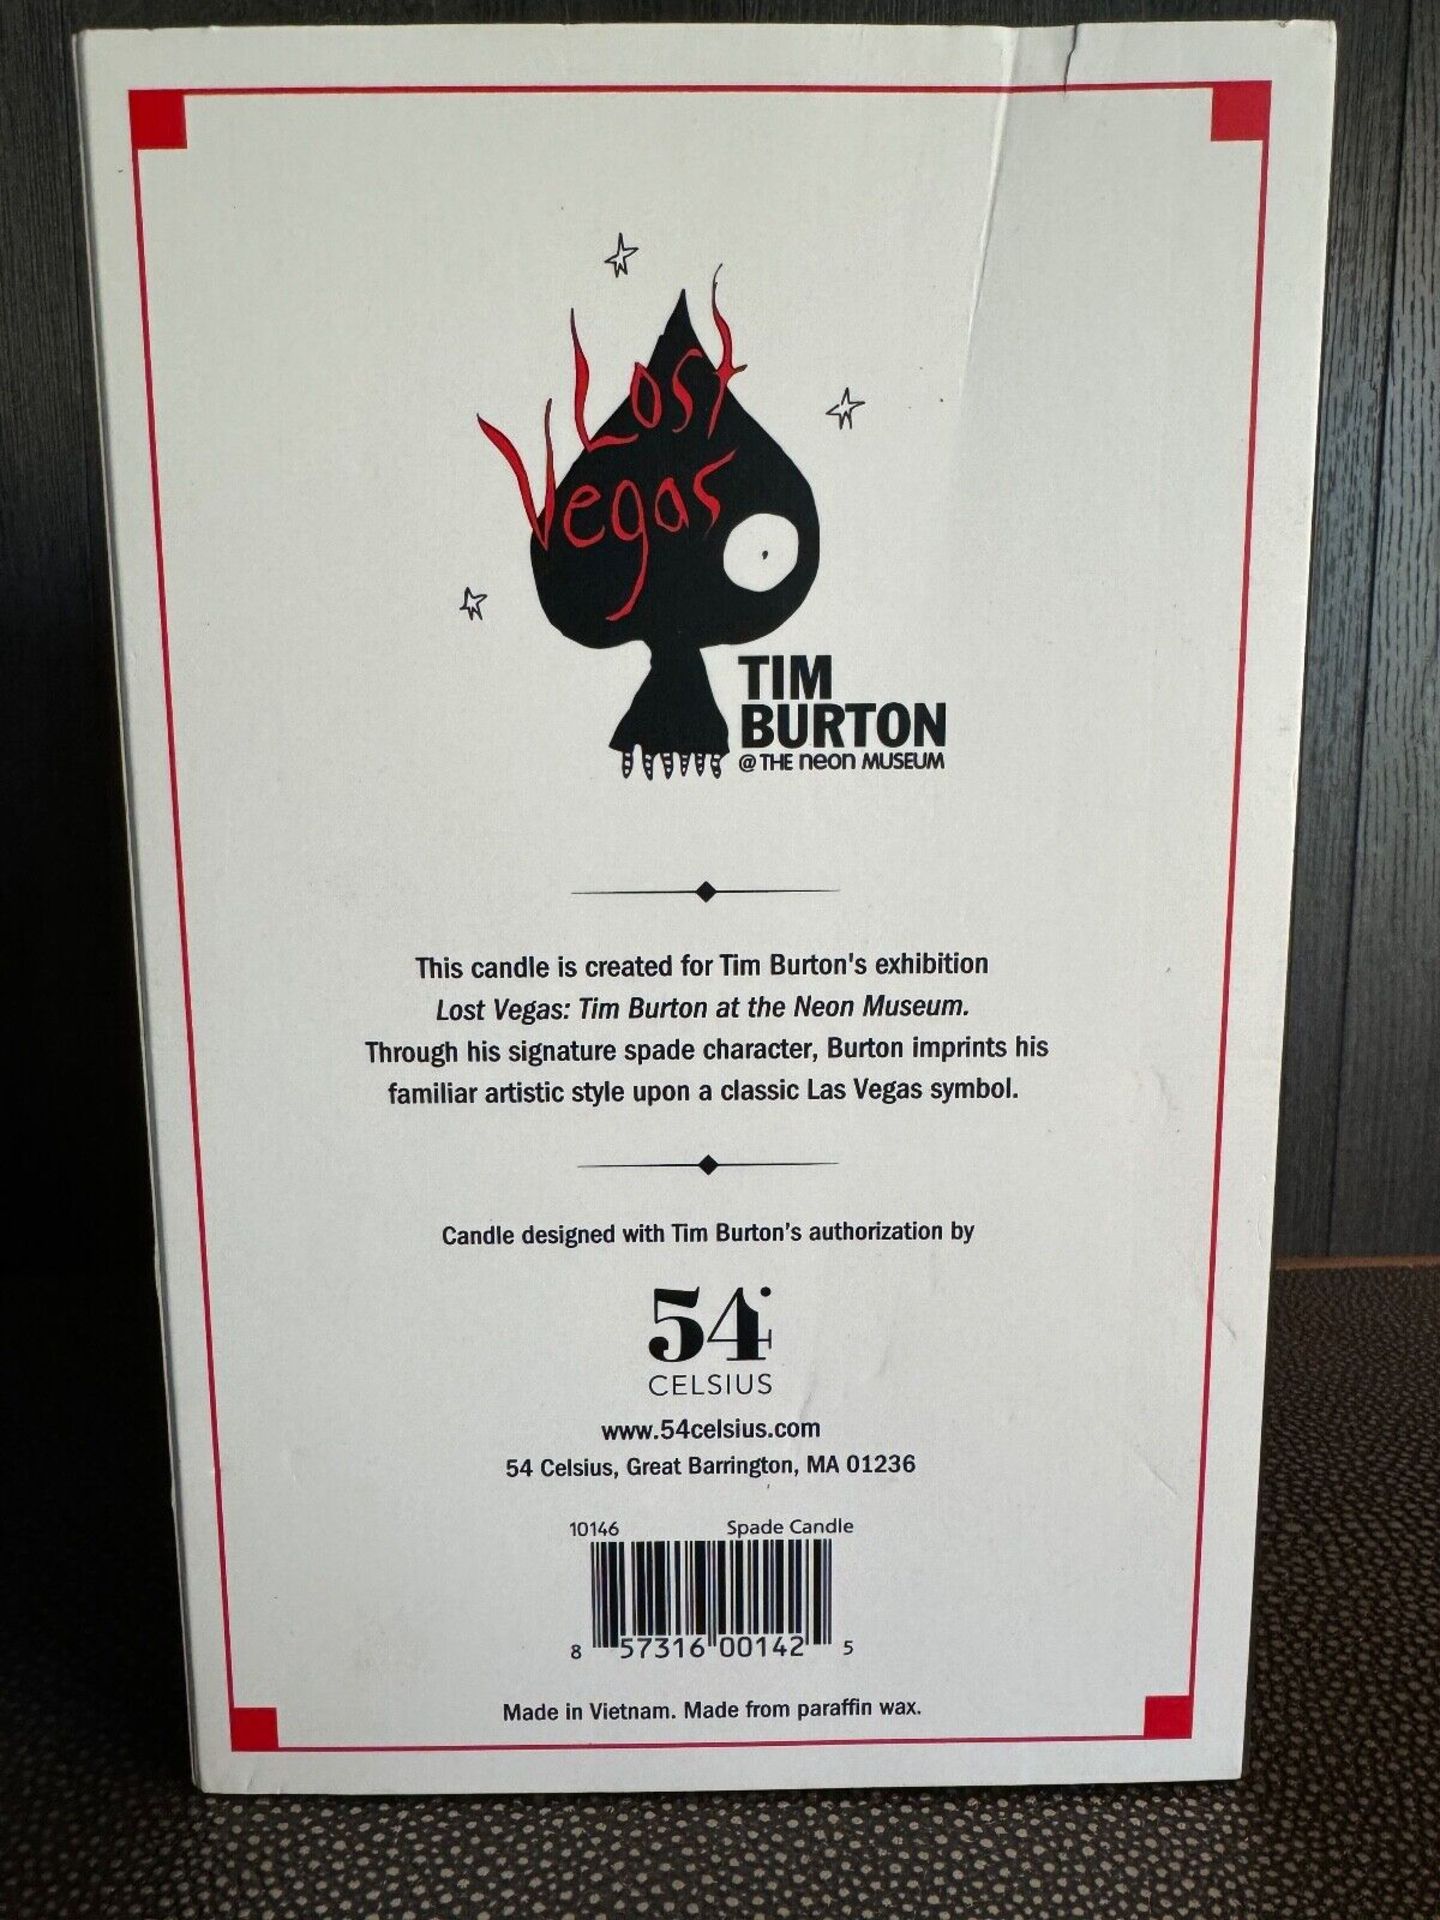 35 PIECES OF Tim Burton Spade Candle Lost Vegas Exhibit Exclusive Limited Edition Of 3000 - Image 5 of 5